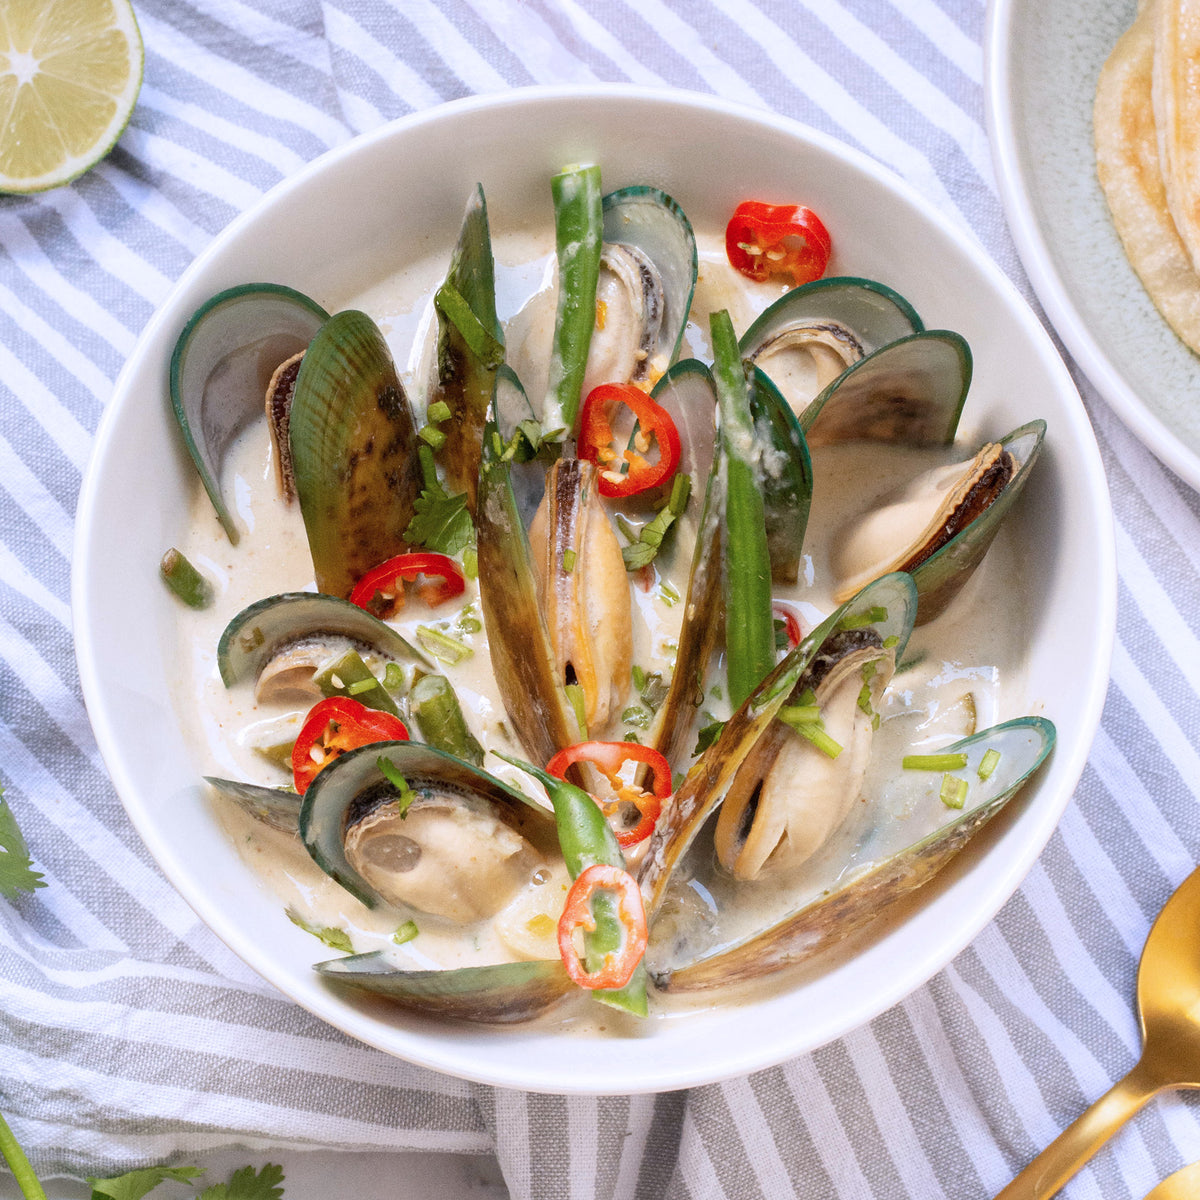 Cooked Greenshell Mussels from New Zealand (500g) - Horizon Farms